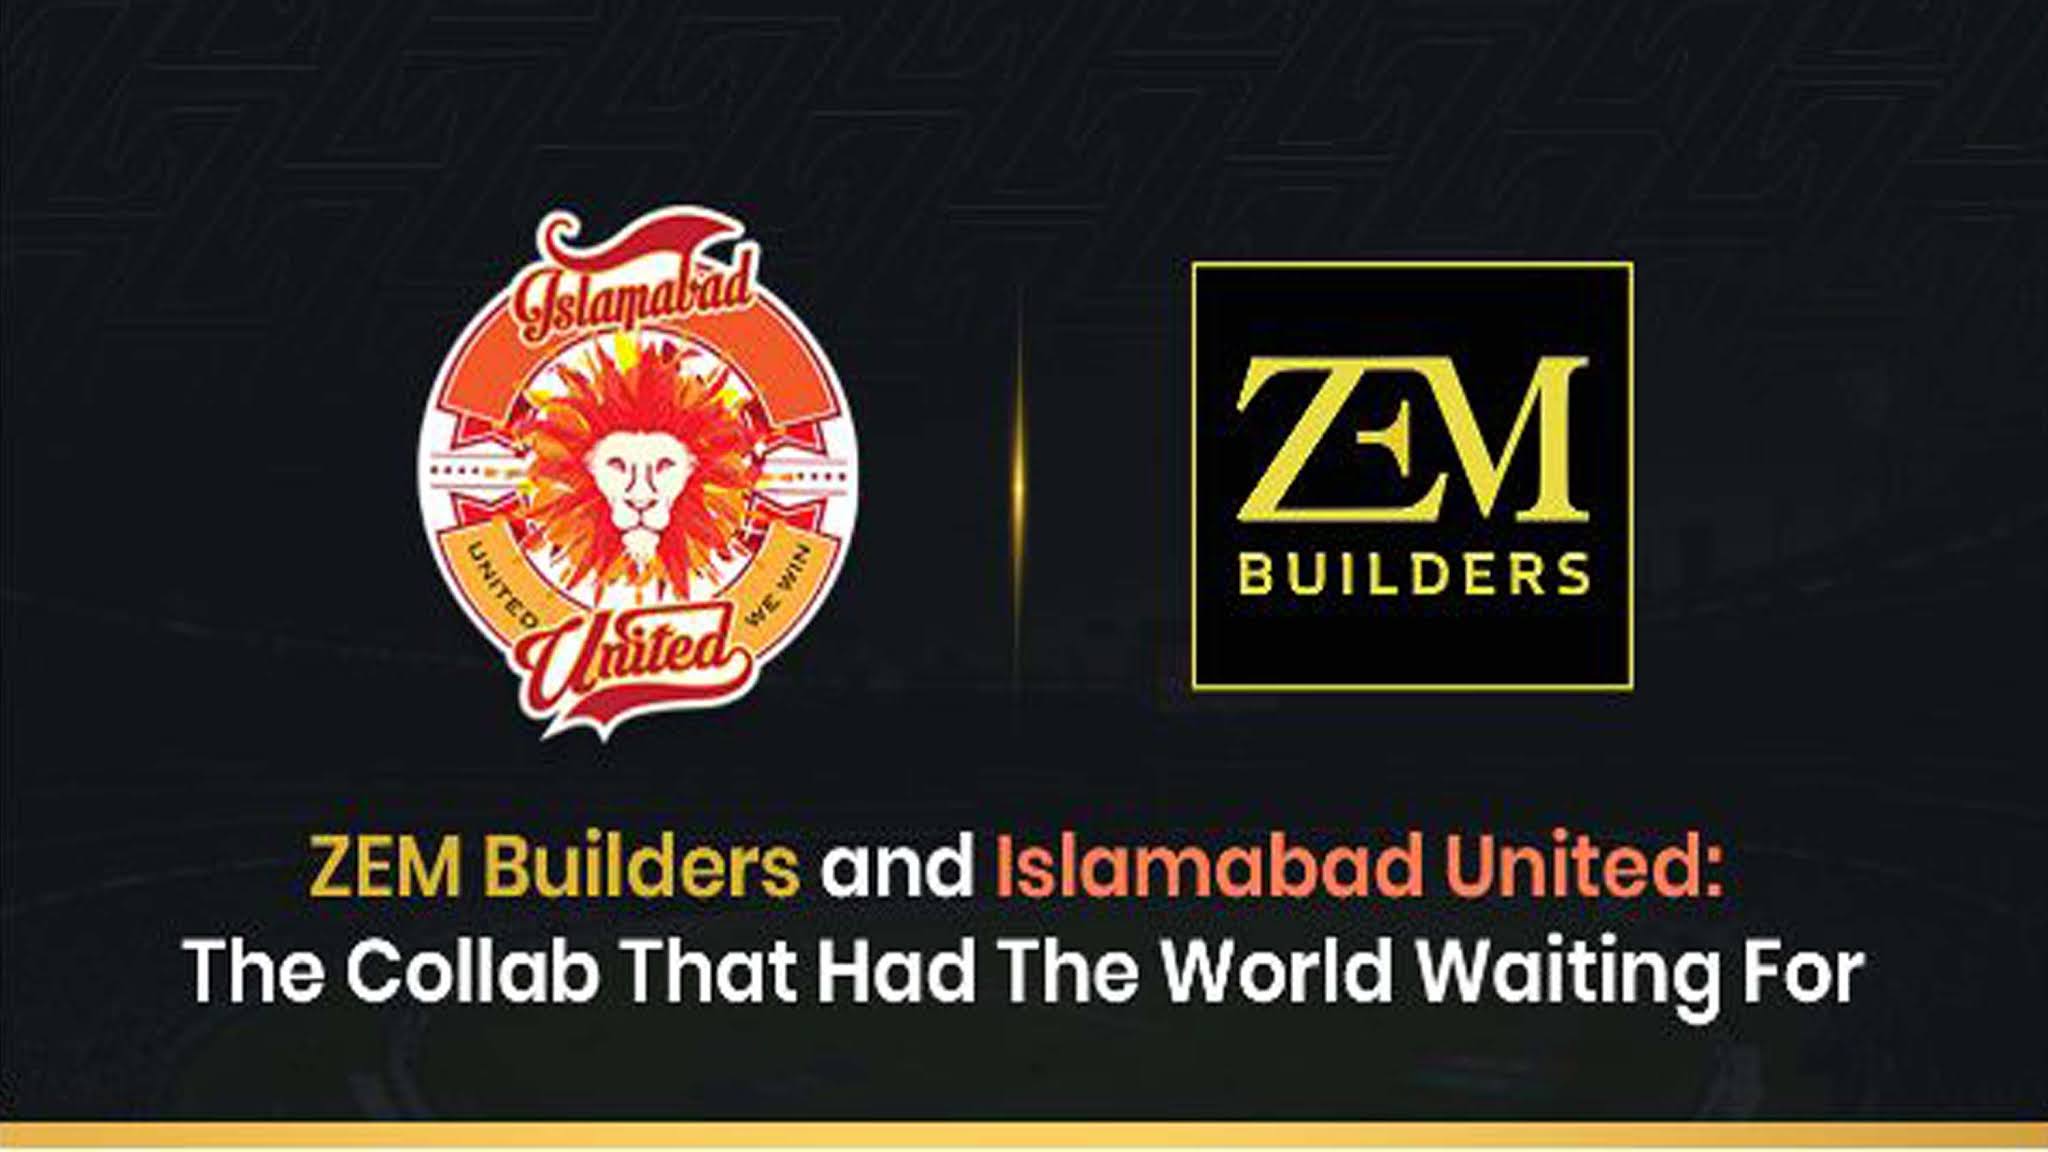 ZEM Builders and Islamabad United: The Collab That Had The World Waiting For